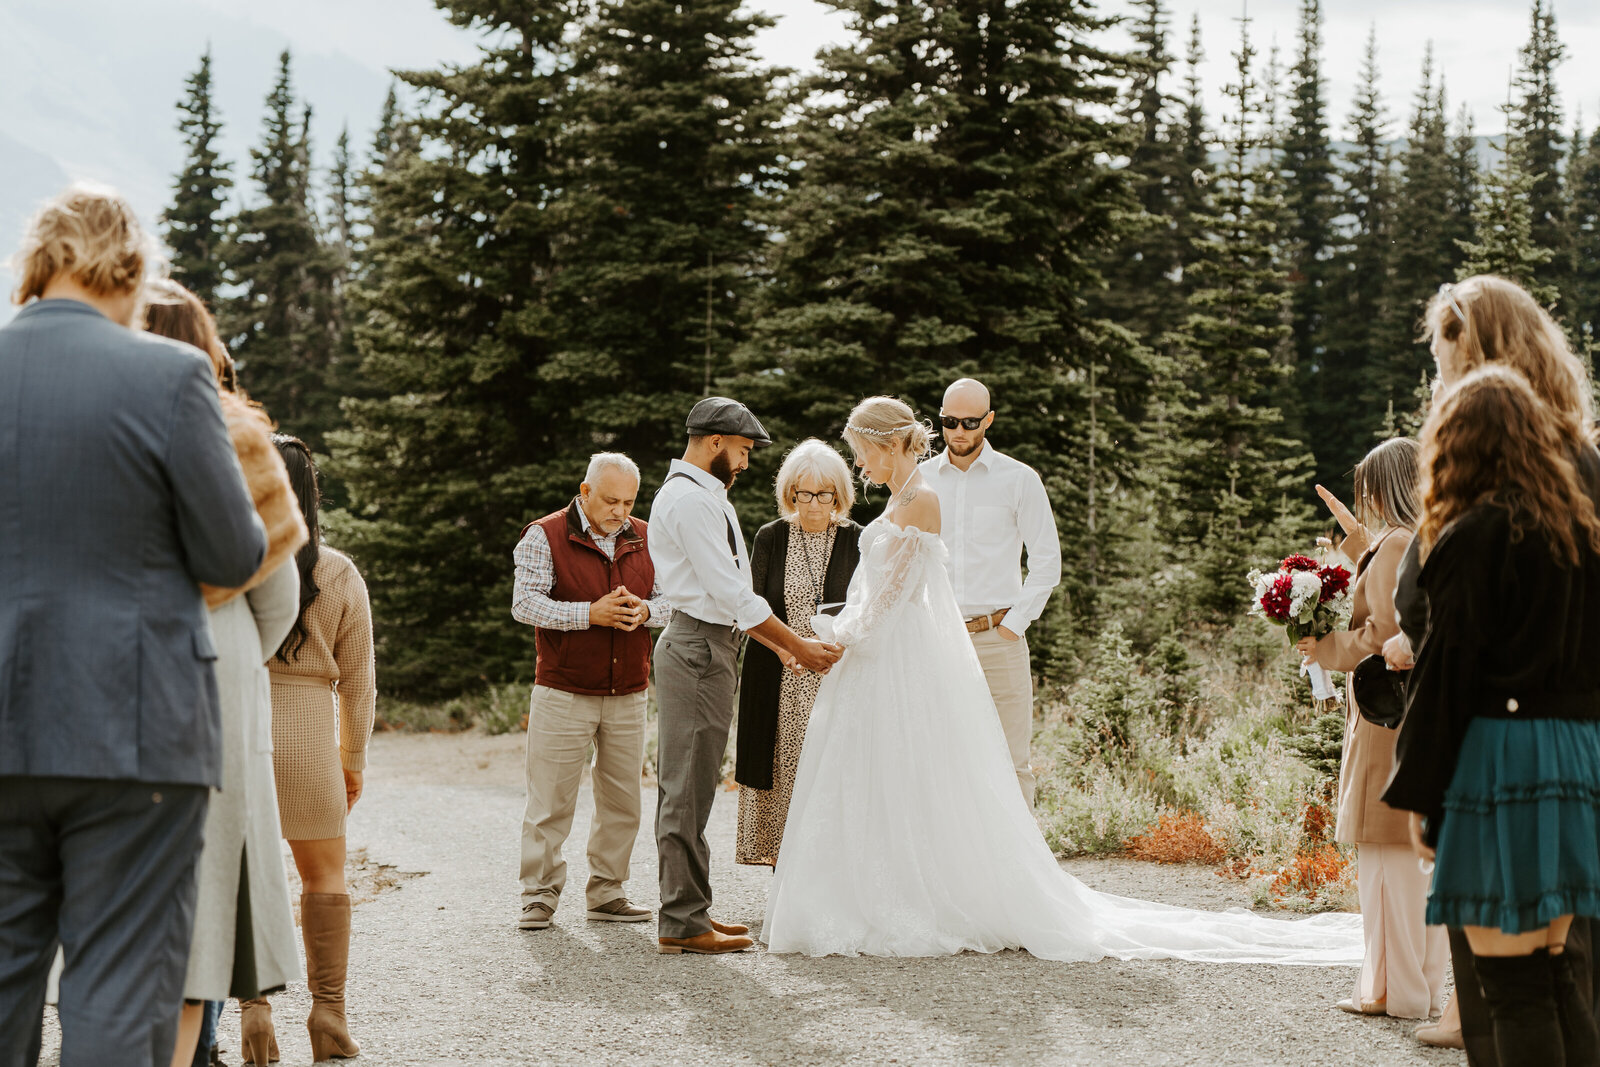 Bride and groom getting married in Mount Rainier National Park with their friends and family praying during their ceremony